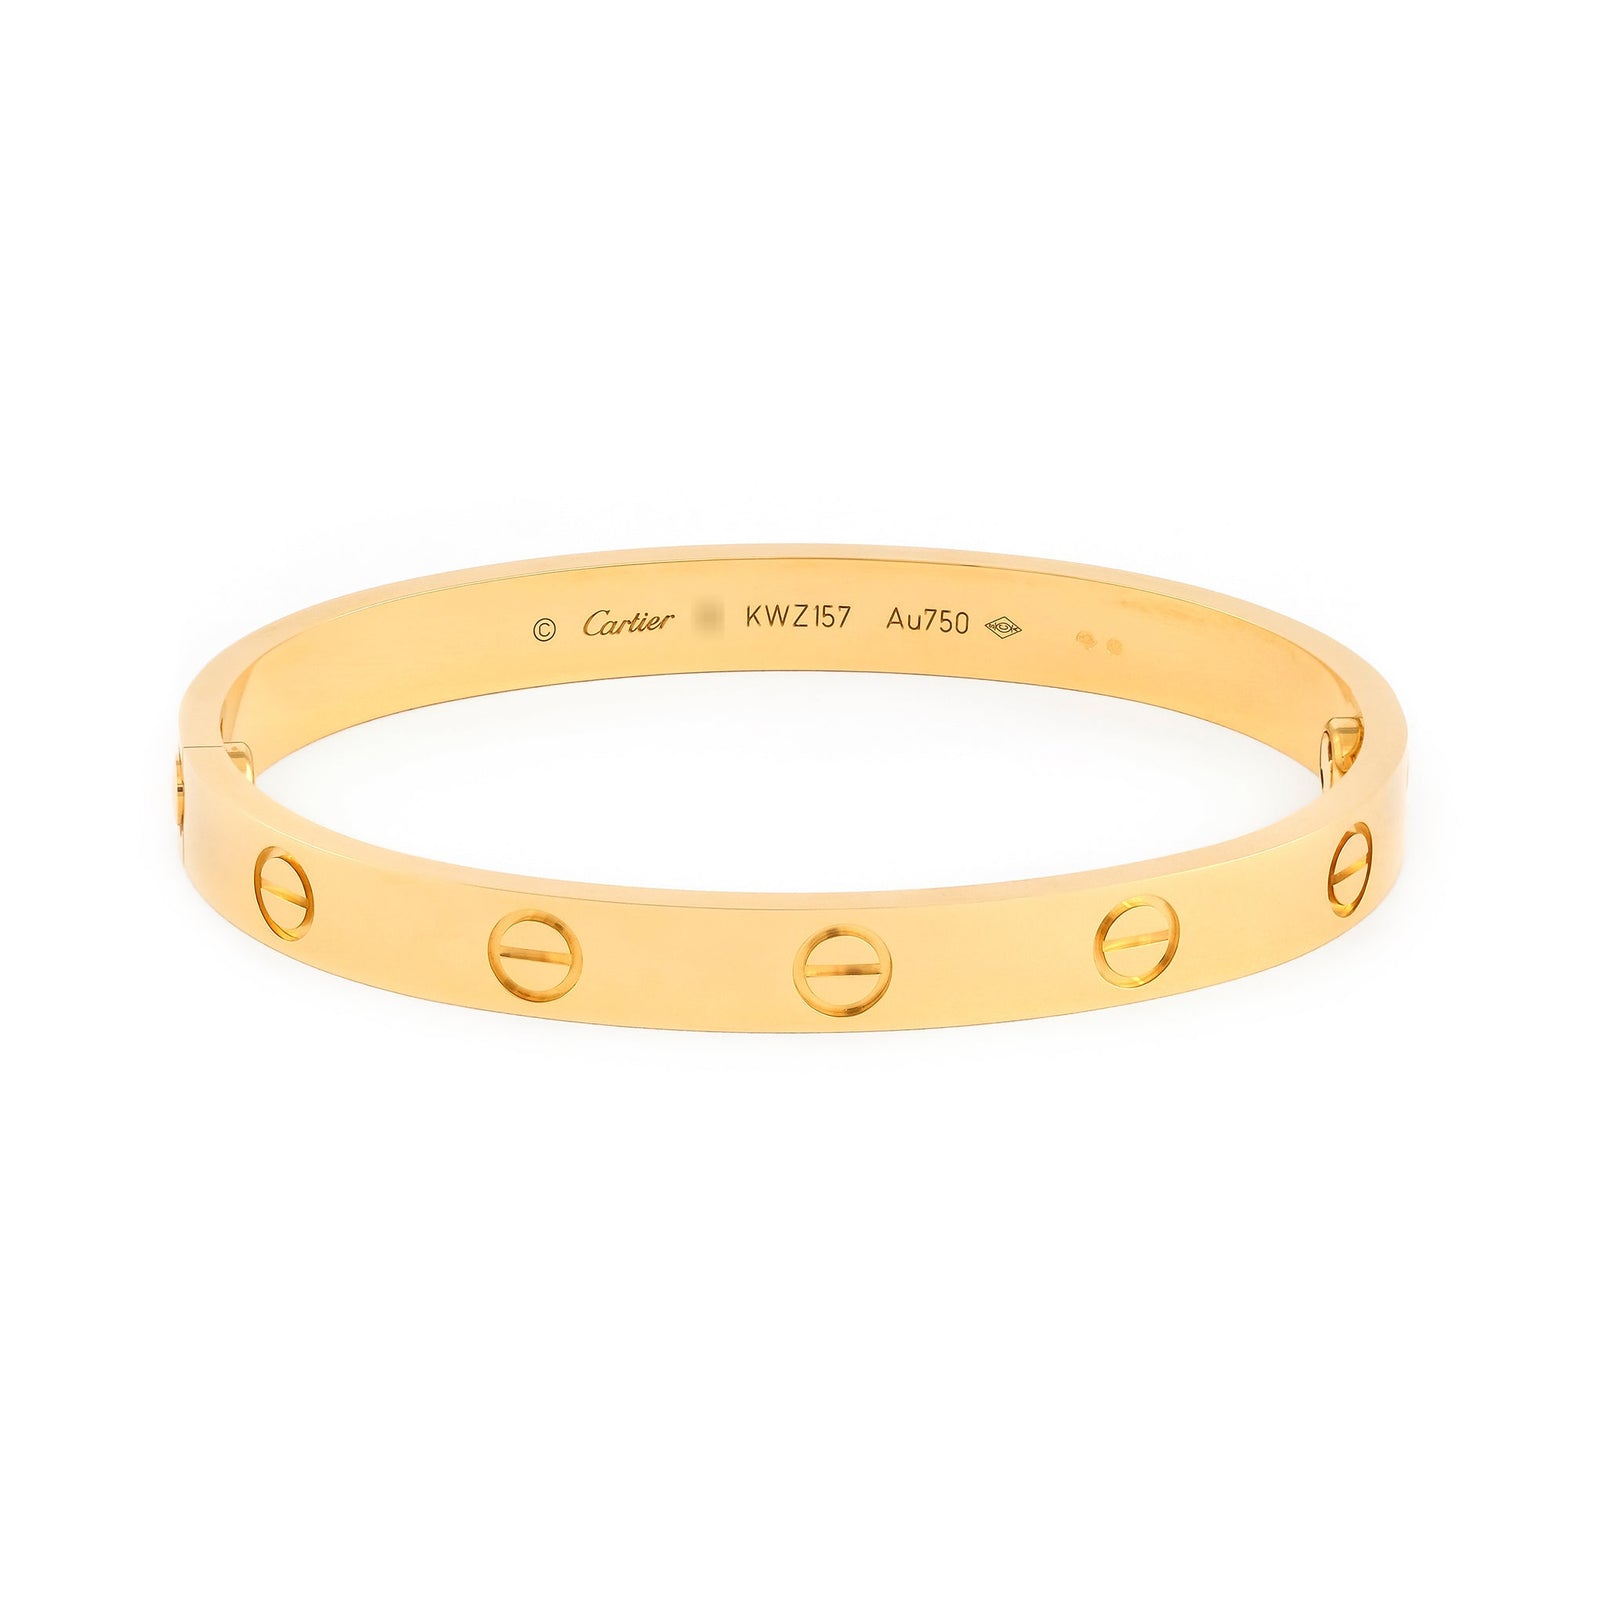 Designer Unisex Of The Cuff Bracelet For Women Classic Screw Style In Gold,  Rose, And Silver Perfect Christmas Gift From Fashion1319, $9.14 | DHgate.Com